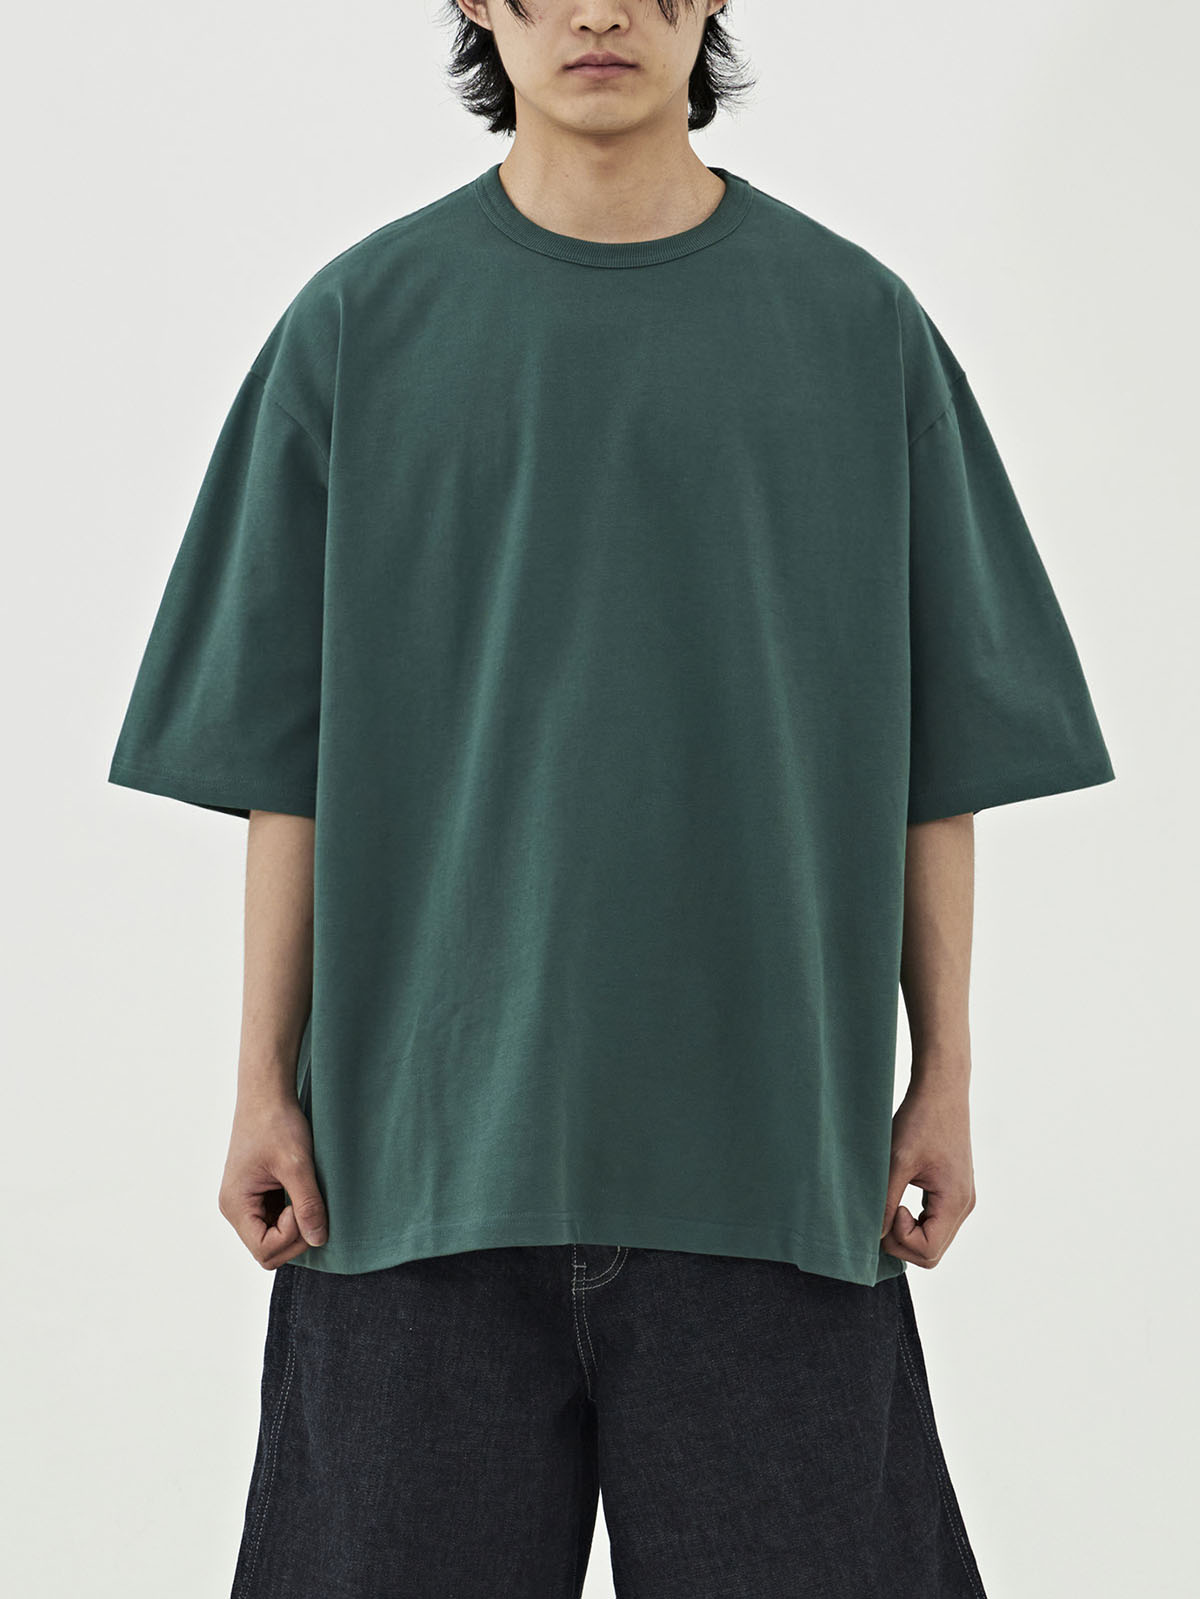 WIDE S/S T-SHIRT (FOREST GREEN)